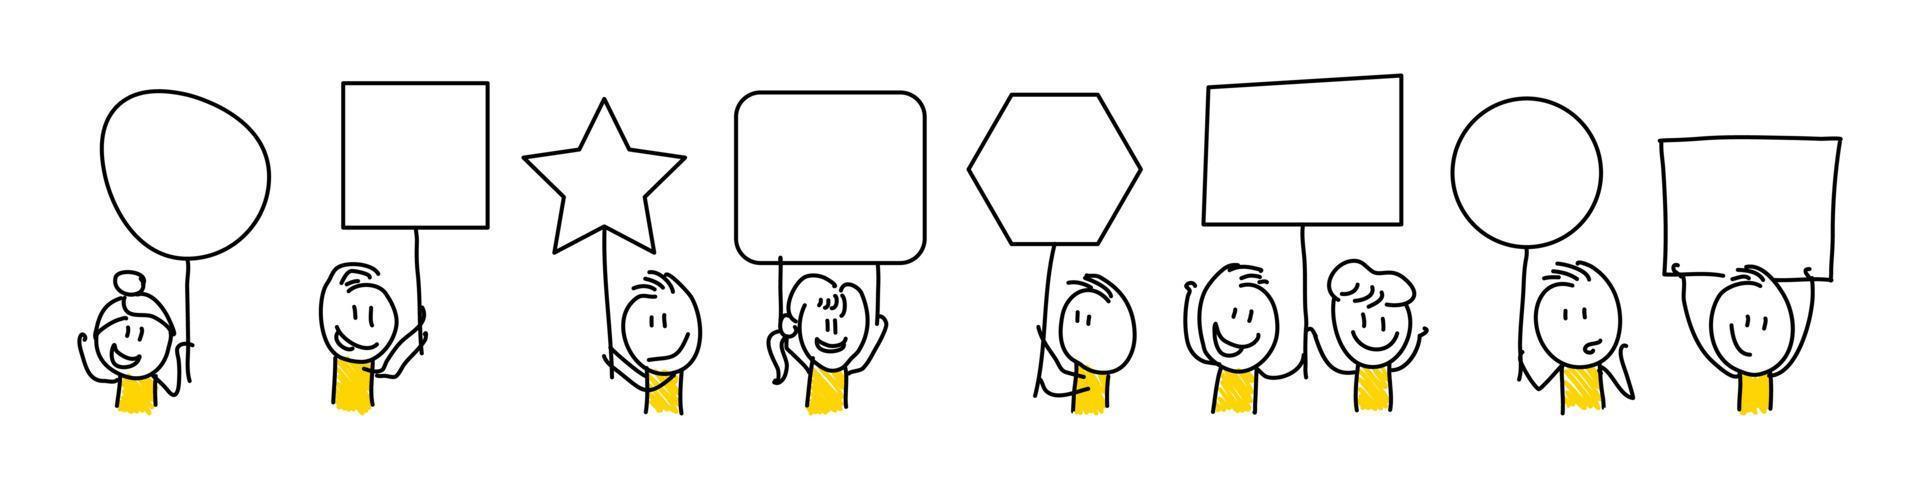 Stick figures. Empty banner set. Vector illustration of people holding blank on white. Nr.1